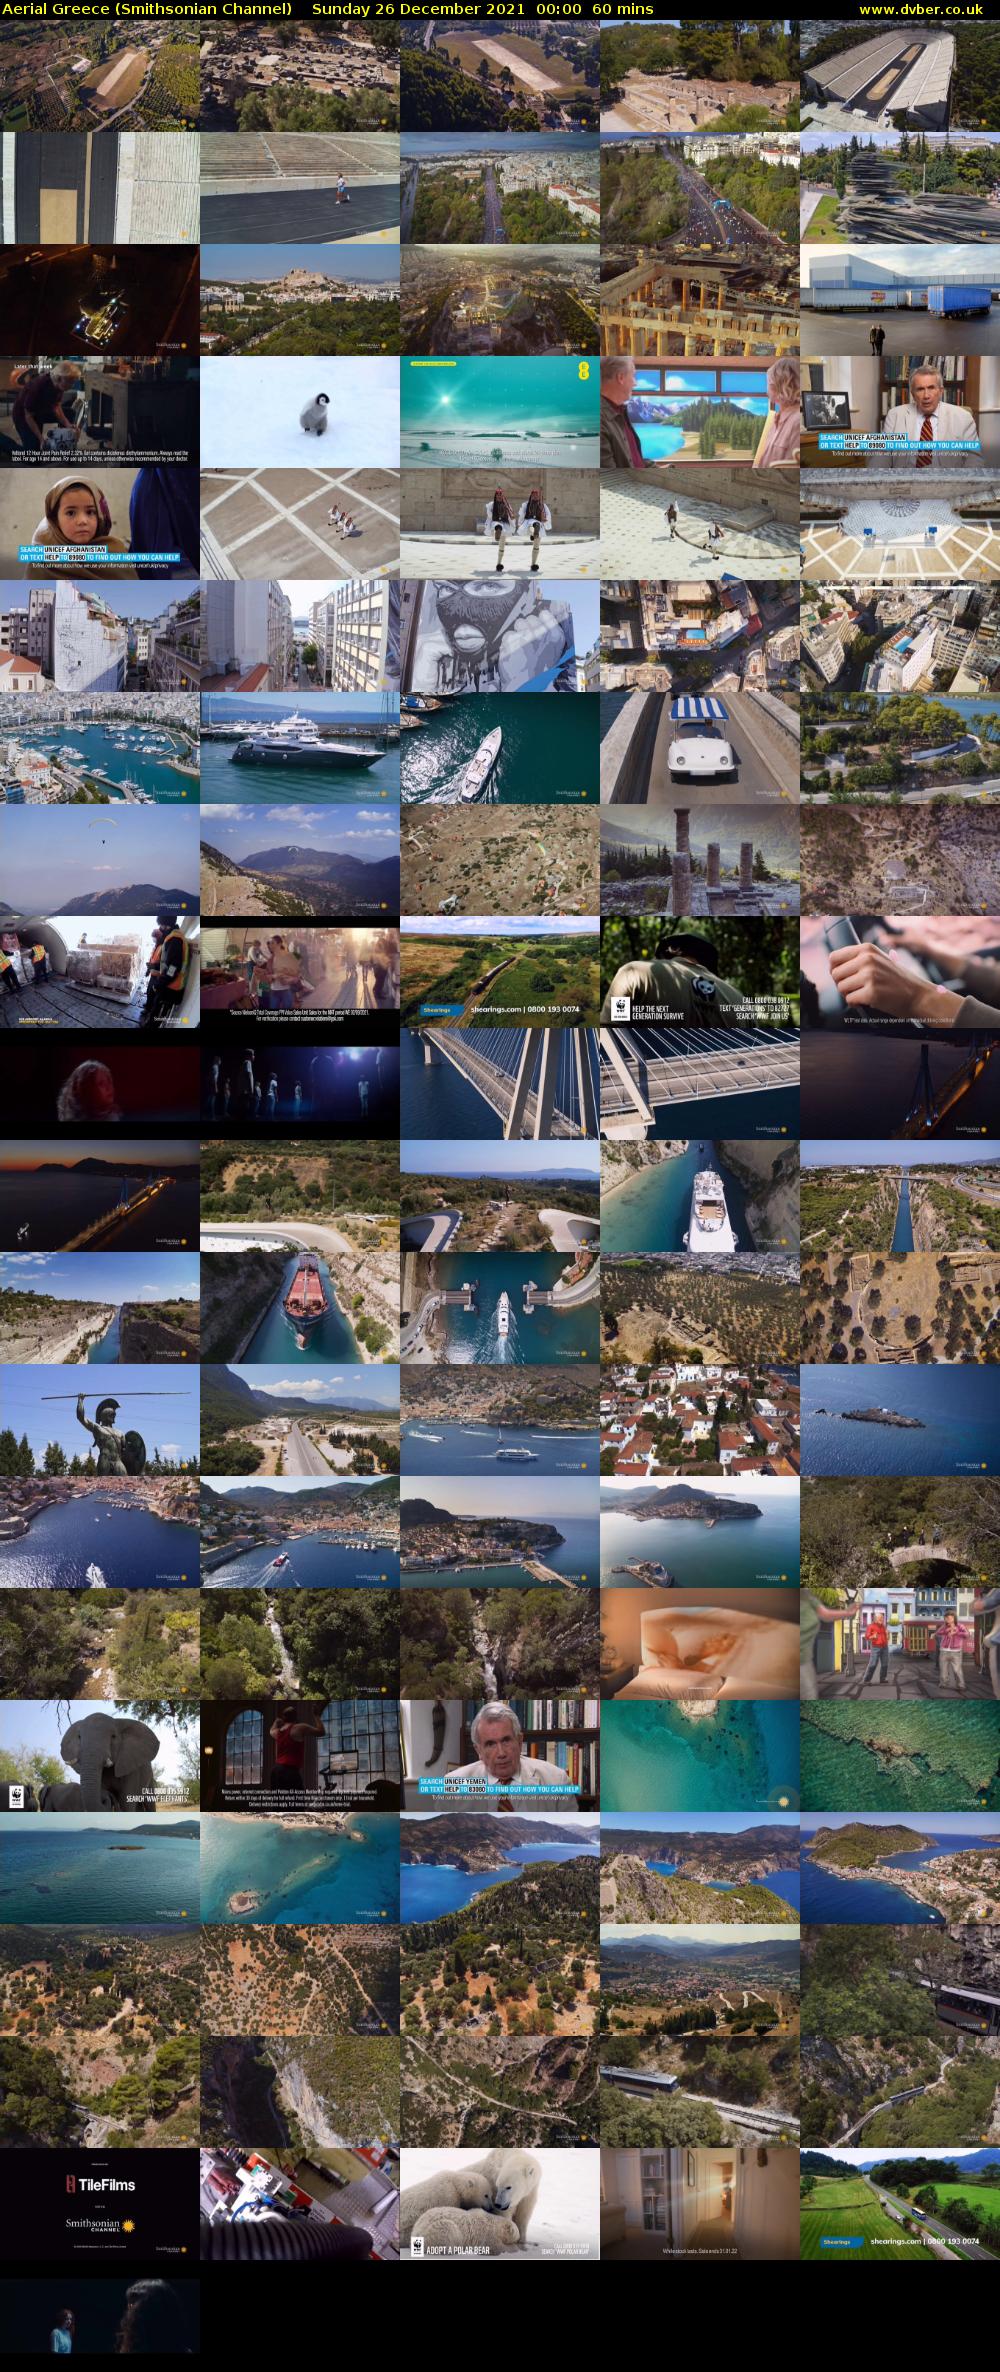 Aerial Greece (Smithsonian Channel) Sunday 26 December 2021 00:00 - 01:00